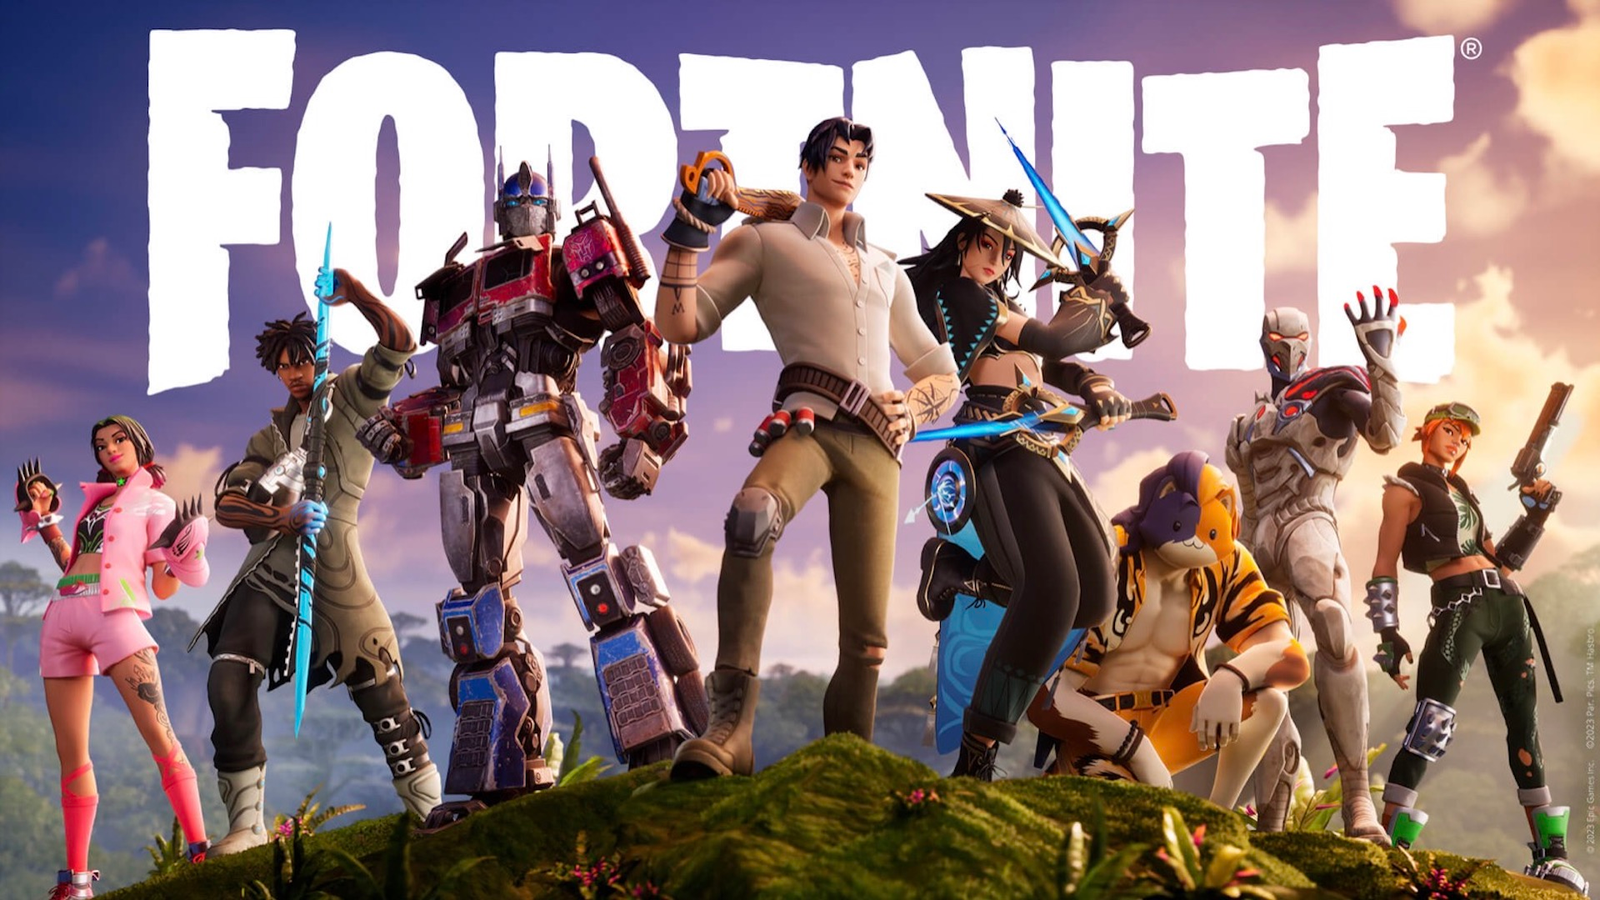 How to play Fortnite Chapter 2: Tips and strategies for new players - CNET